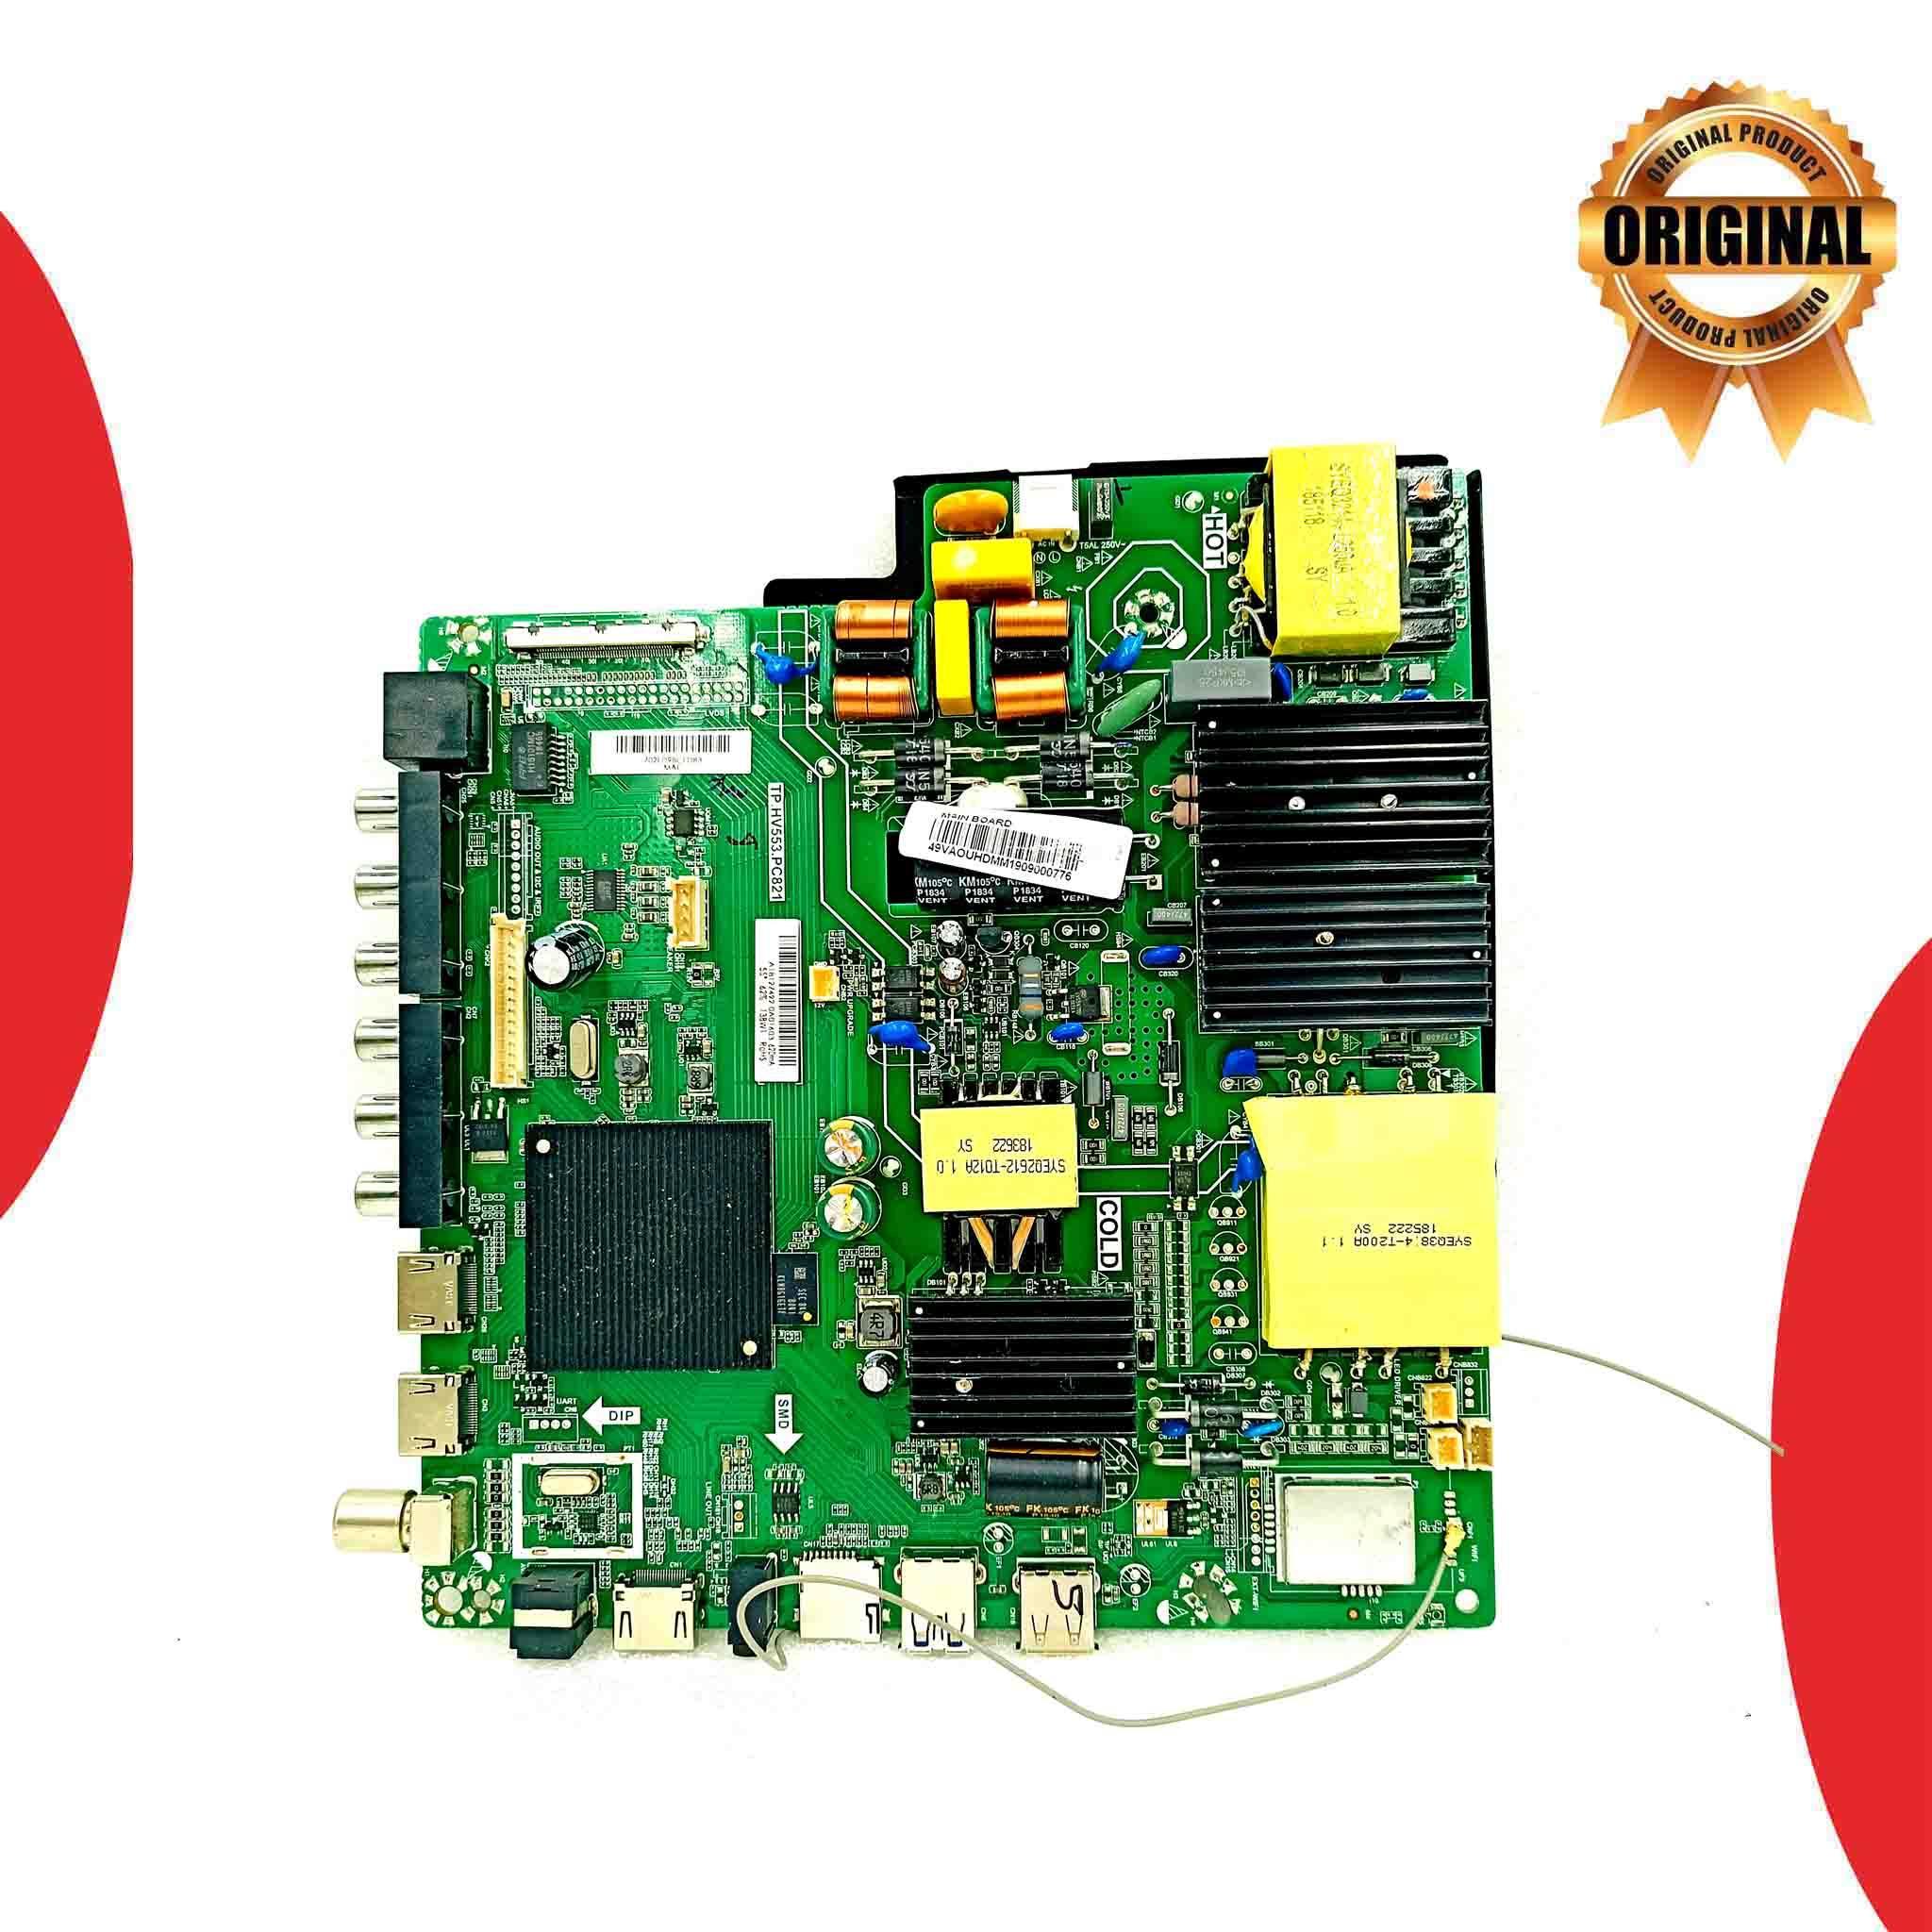 Marq 49 inch LED TV Motherboard for Model 49VAOUHDM - Great Bharat Electronics